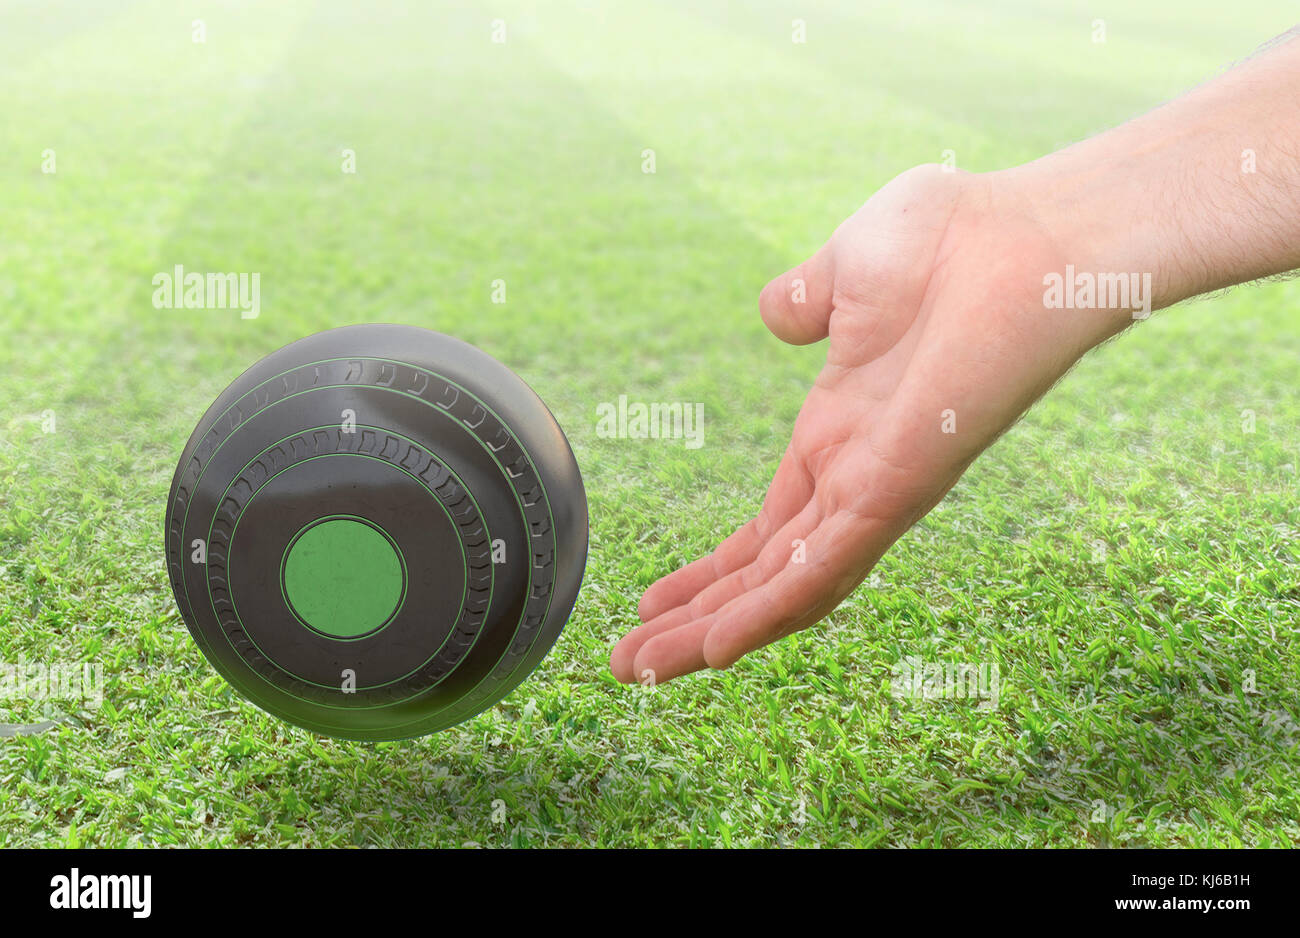 A male hand bowling and releasing a wooden lawn bowling ball on a green lawn grass surface -3D render Stock Photo